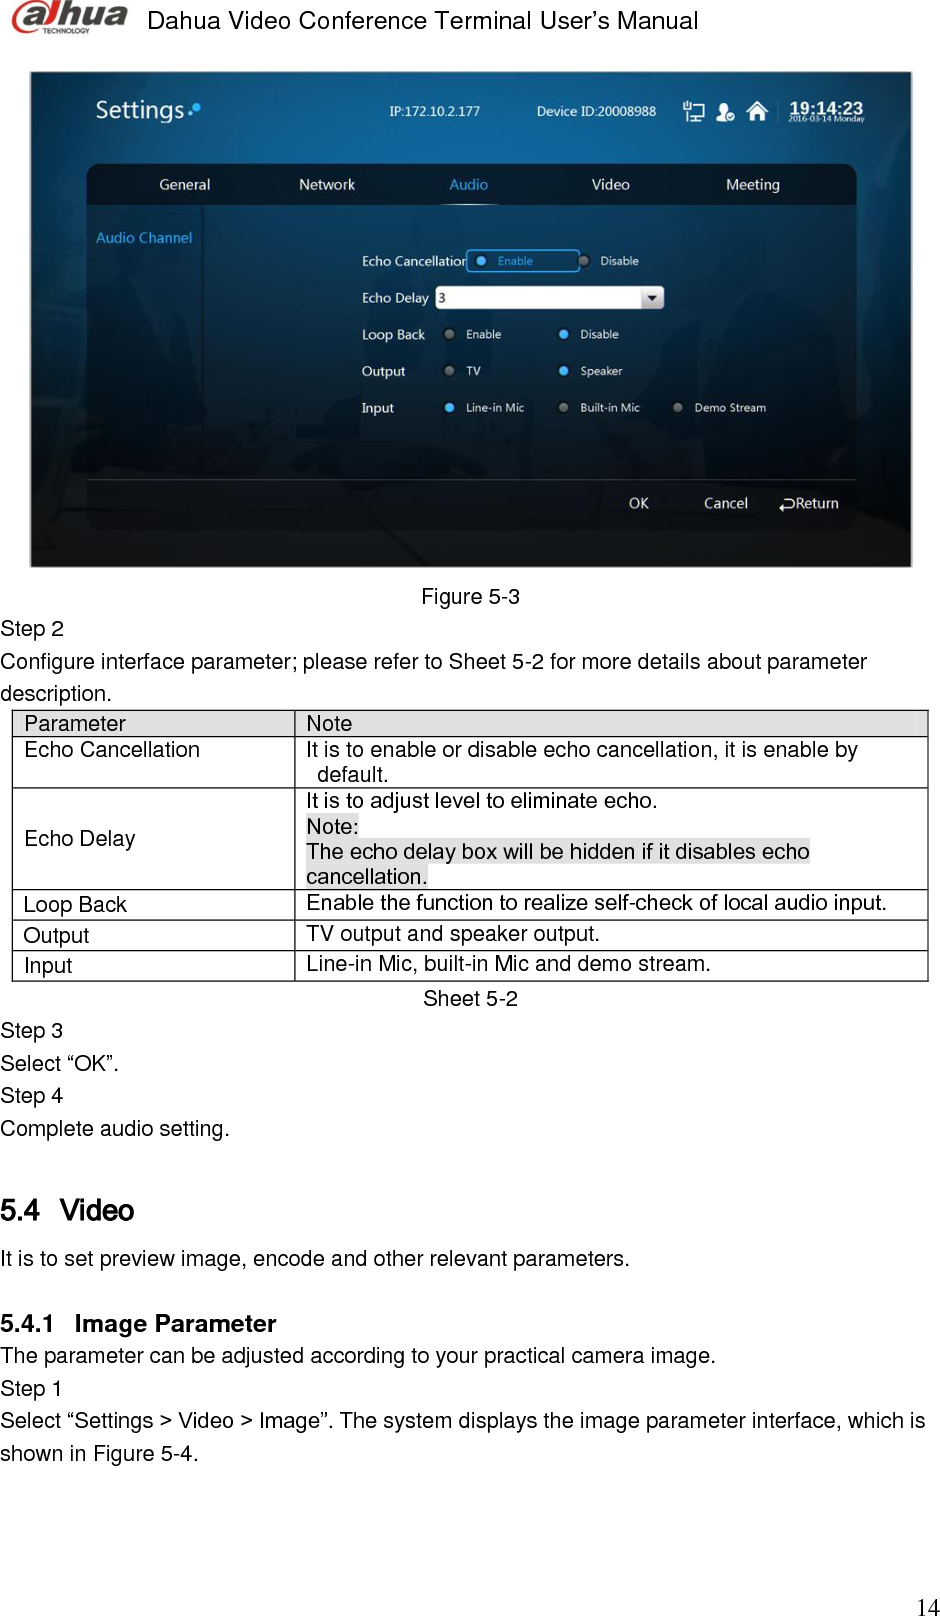  Dahua Video Conference Terminal User’s Manual                                                                              14  Figure 5-3 Step 2  Configure interface parameter; please refer to Sheet 5-2 for more details about parameter description.  Parameter Note  Echo Cancellation It is to enable or disable echo cancellation, it is enable by default.  Echo Delay It is to adjust level to eliminate echo. Note:  The echo delay box will be hidden if it disables echo cancellation.  Loop Back Enable the function to realize self-check of local audio input.  Output  TV output and speaker output.  Input Line-in Mic, built-in Mic and demo stream. Sheet 5-2 Step 3  Select “OK”. Step 4  Complete audio setting.   5.4 Video  It is to set preview image, encode and other relevant parameters.  5.4.1  Image Parameter The parameter can be adjusted according to your practical camera image.  Step 1  Select “Settings &gt; Video &gt; Image”. The system displays the image parameter interface, which is shown in Figure 5-4.  